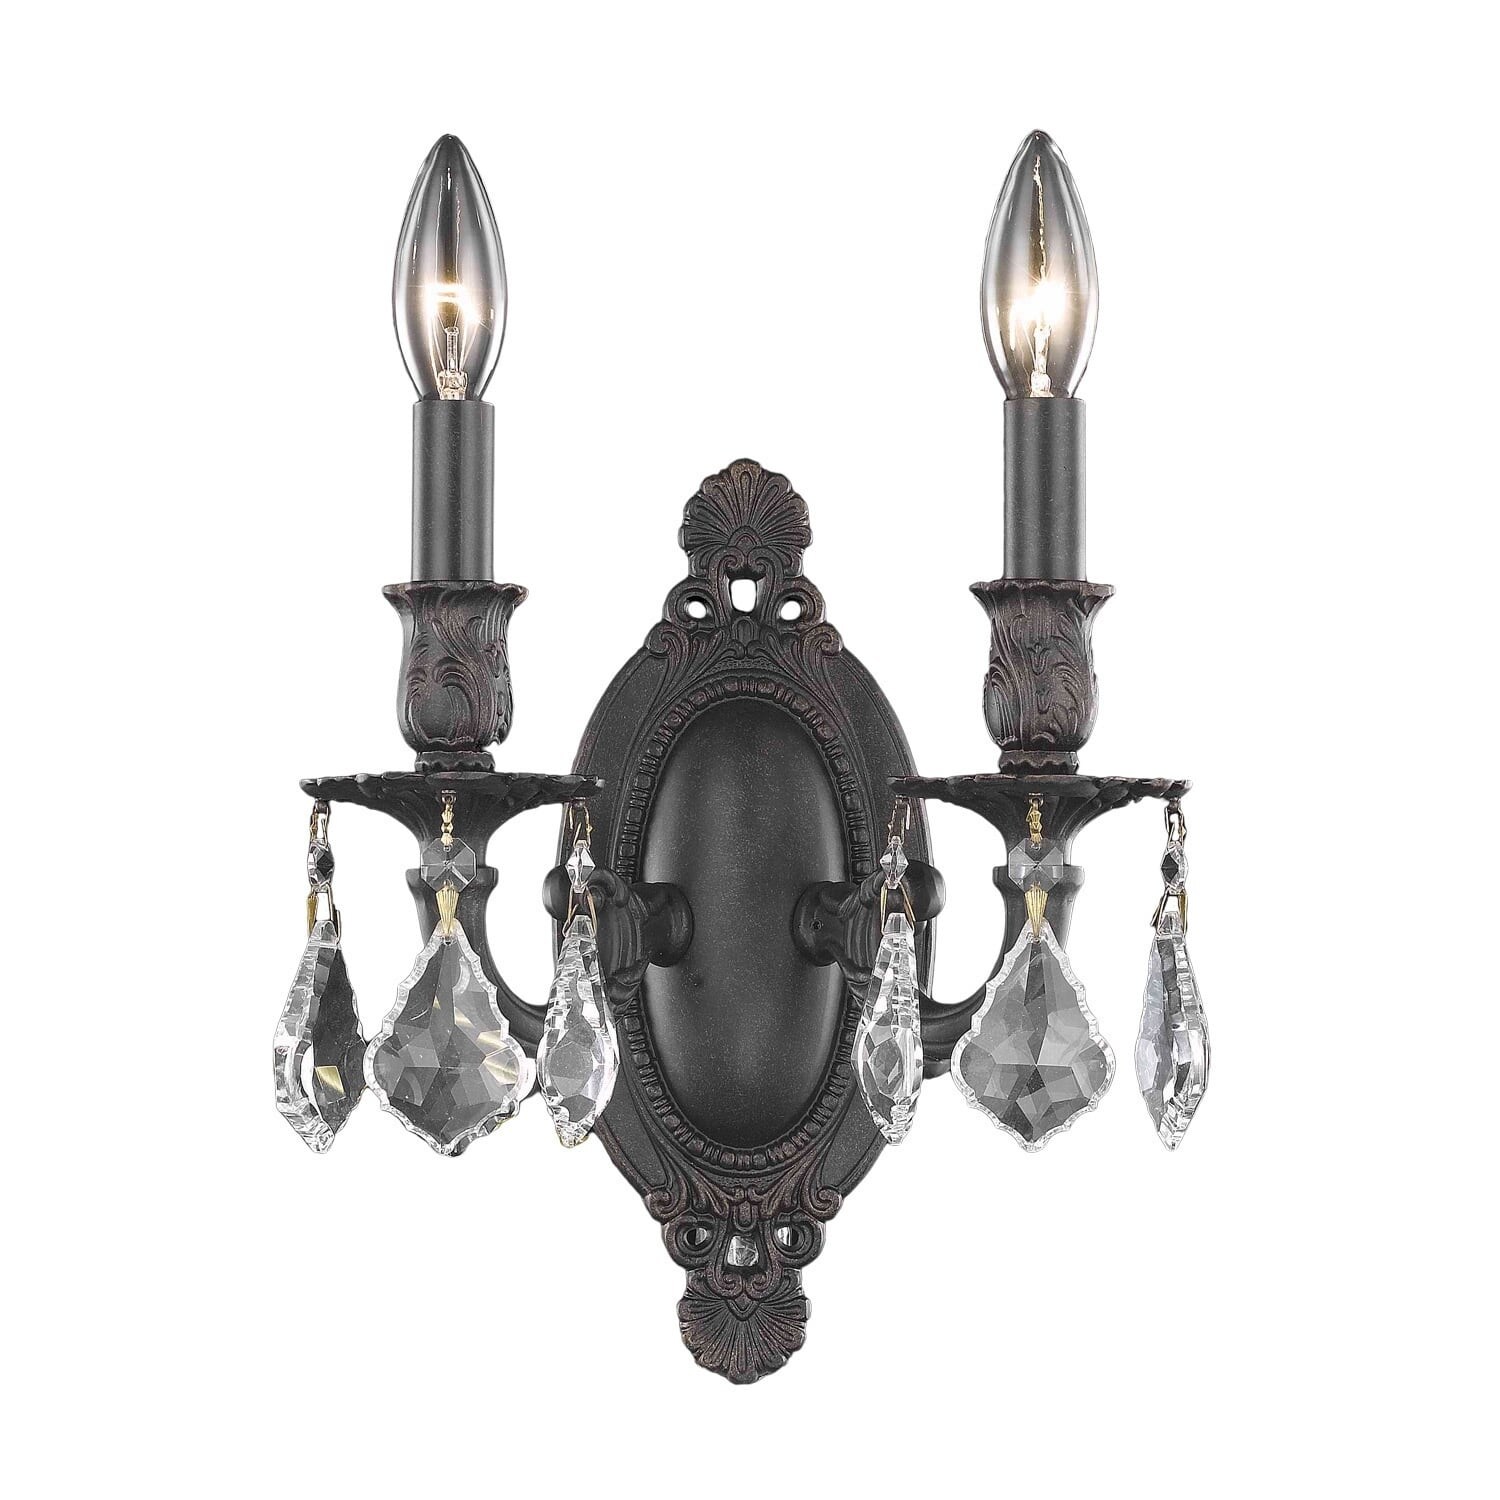 Christopher Knight Home Aubonne 2 light Royal Cut Crystal/ Antique Bronze Wall Sconce